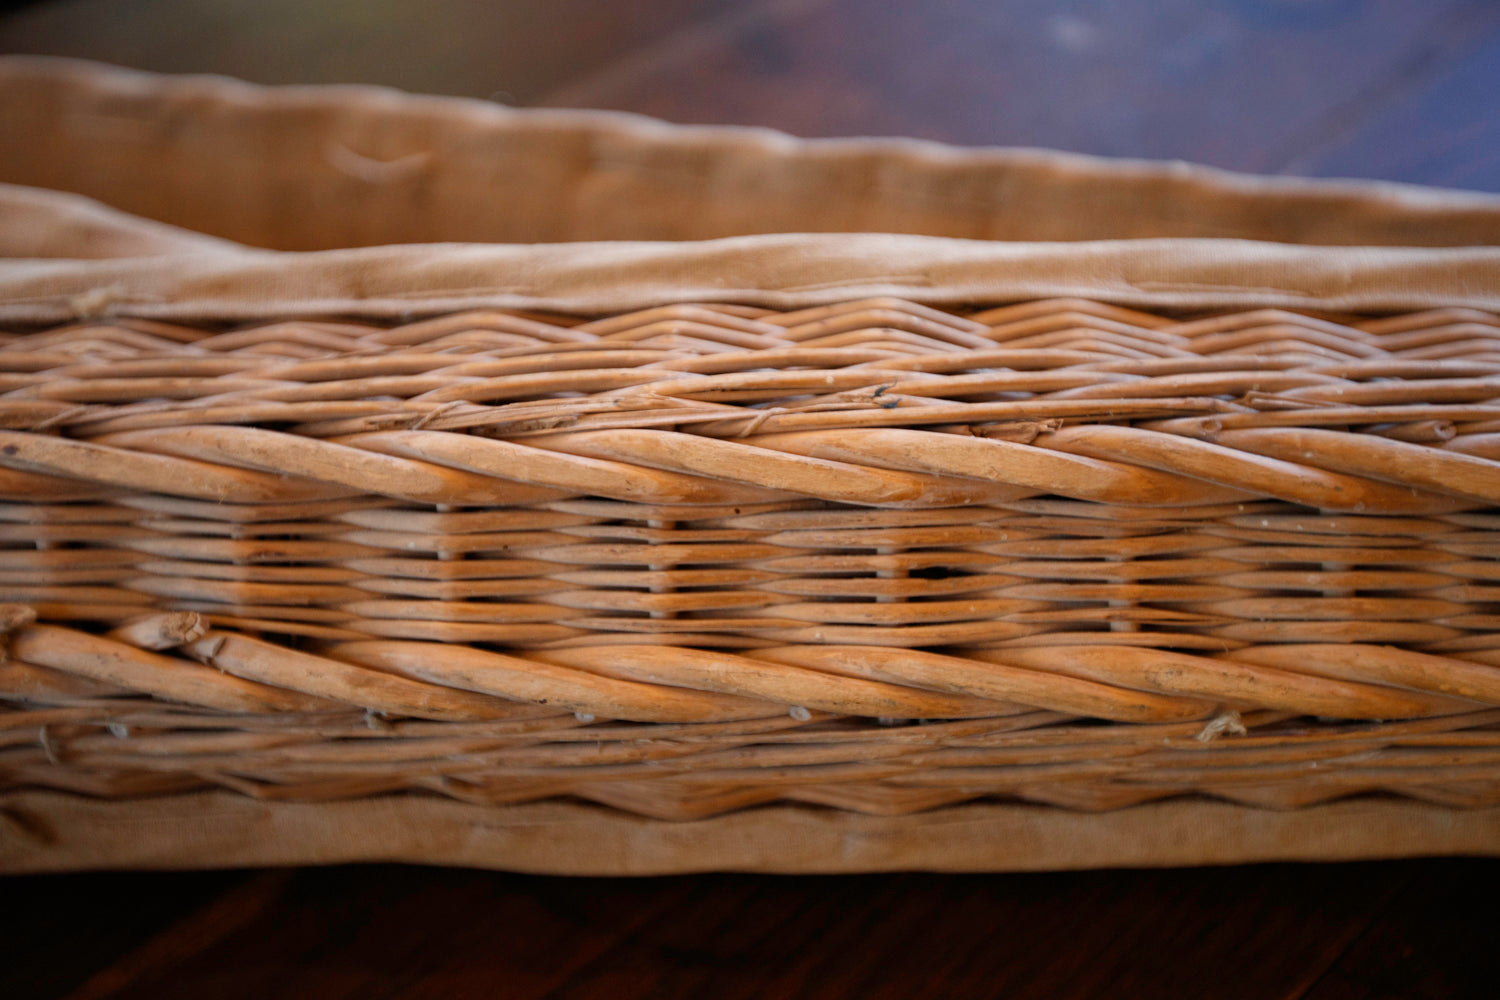 French Baguette Baskets